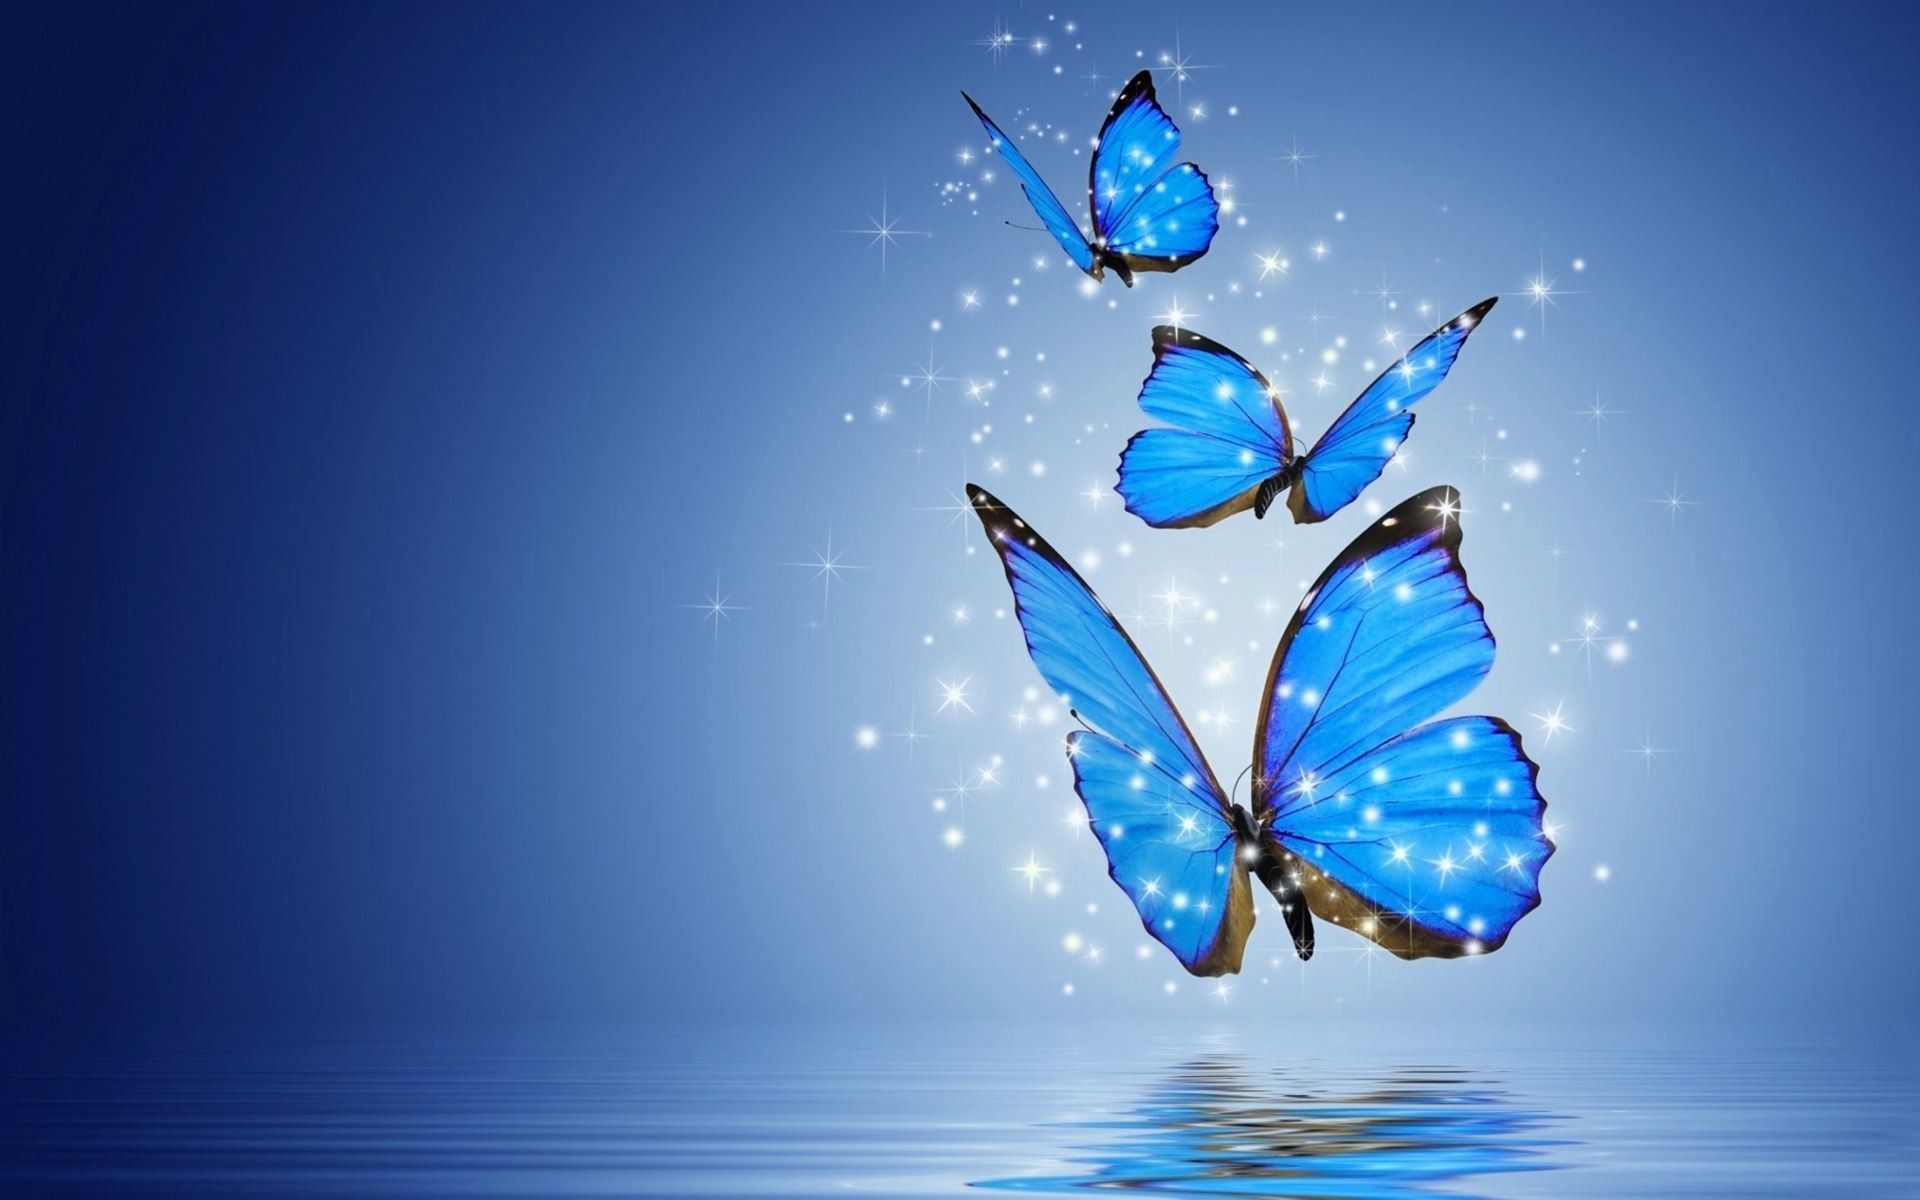 Cute Blue Butterfly Wallpaper Images  Free Download on Freepik